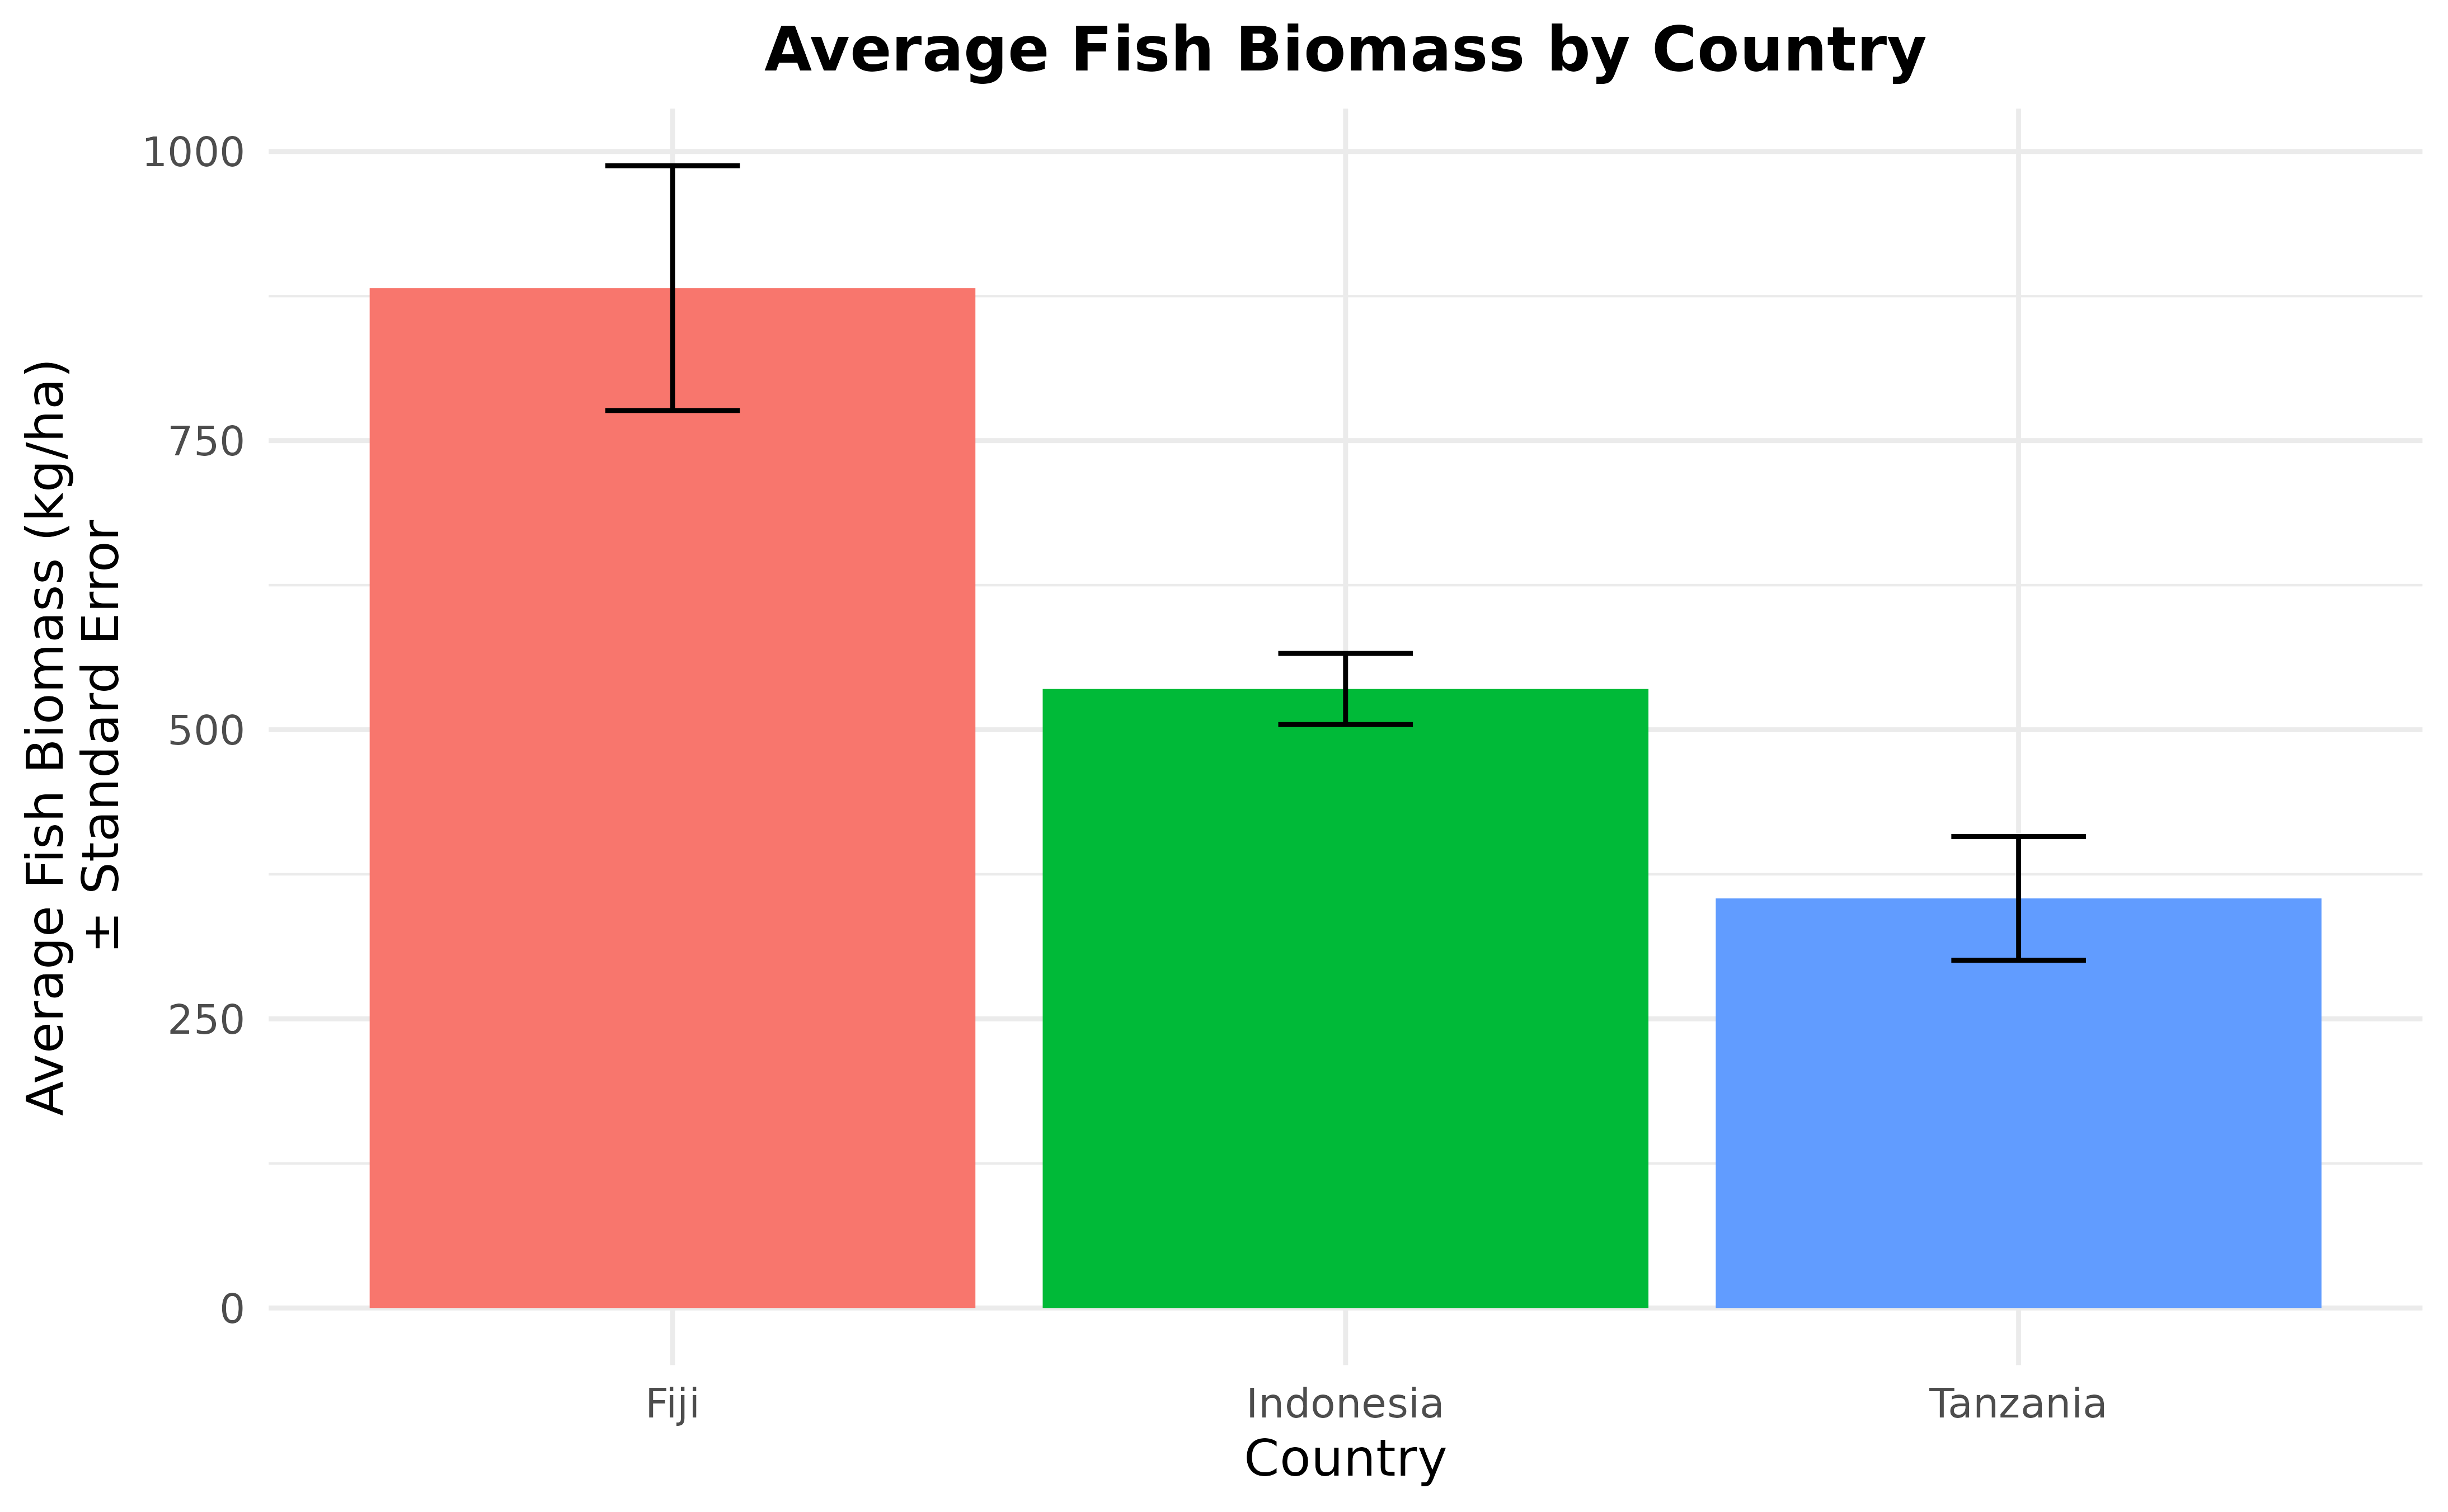 A bar chart with country on the x axis and average fish biomass on the y axis. The bars are colored in red, green, and blue to differentiate per country. The plot now has a title: Average Fish Biomass per Country. The x axis is titled: Country and the y axis is titled: Average Fish Biomass (kg/ha).